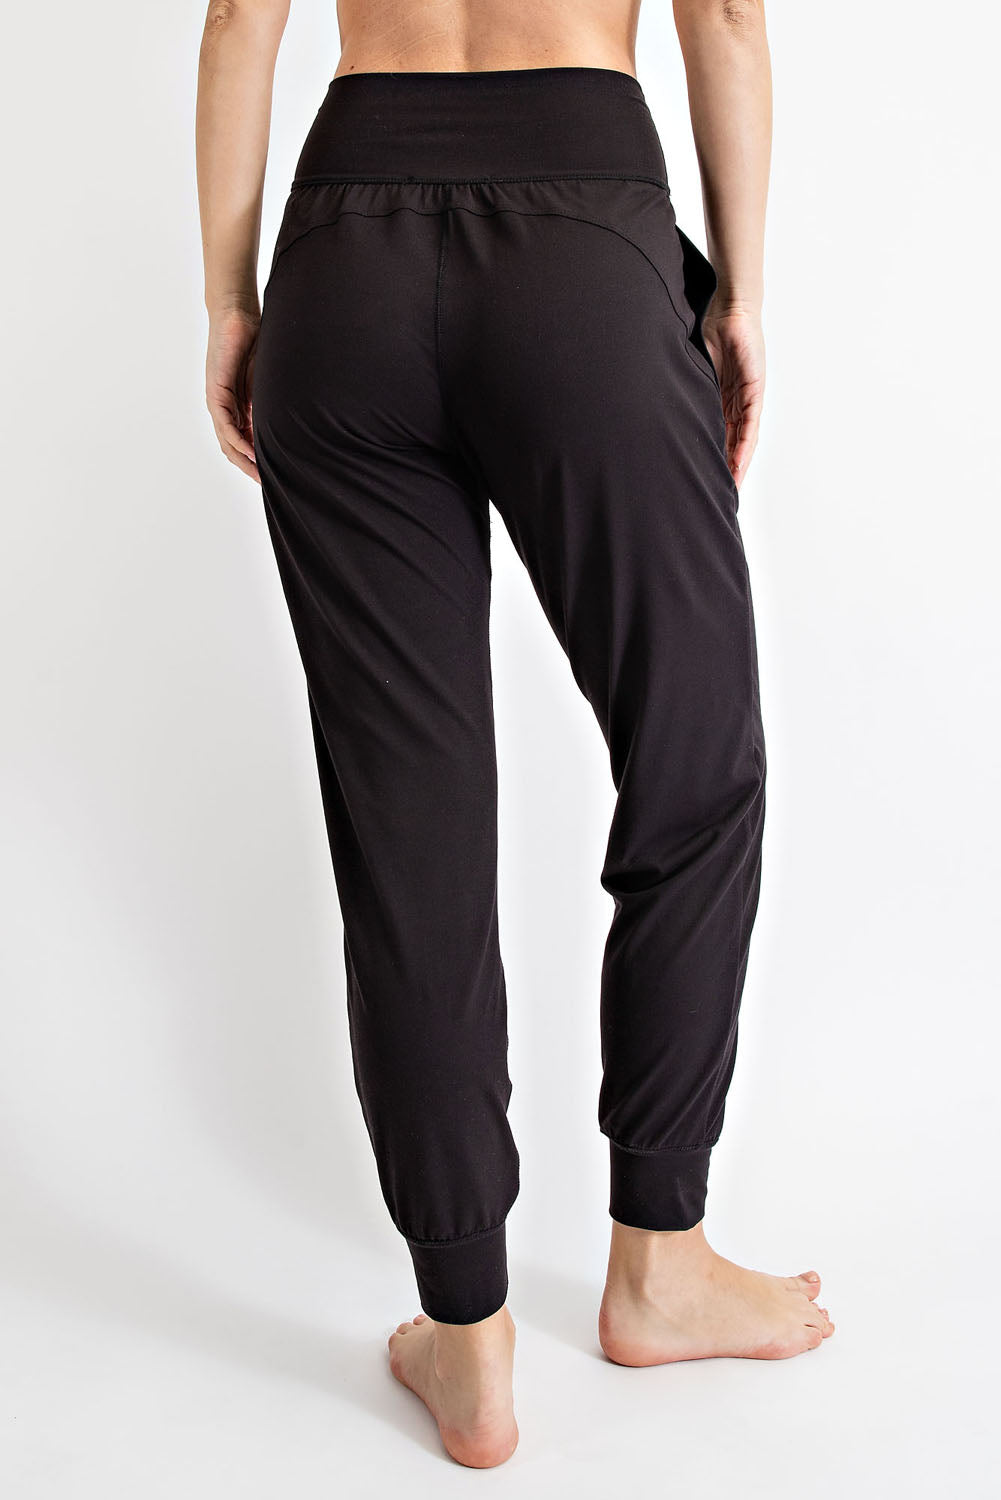 Ultimate Buttery Soft Joggers - Black